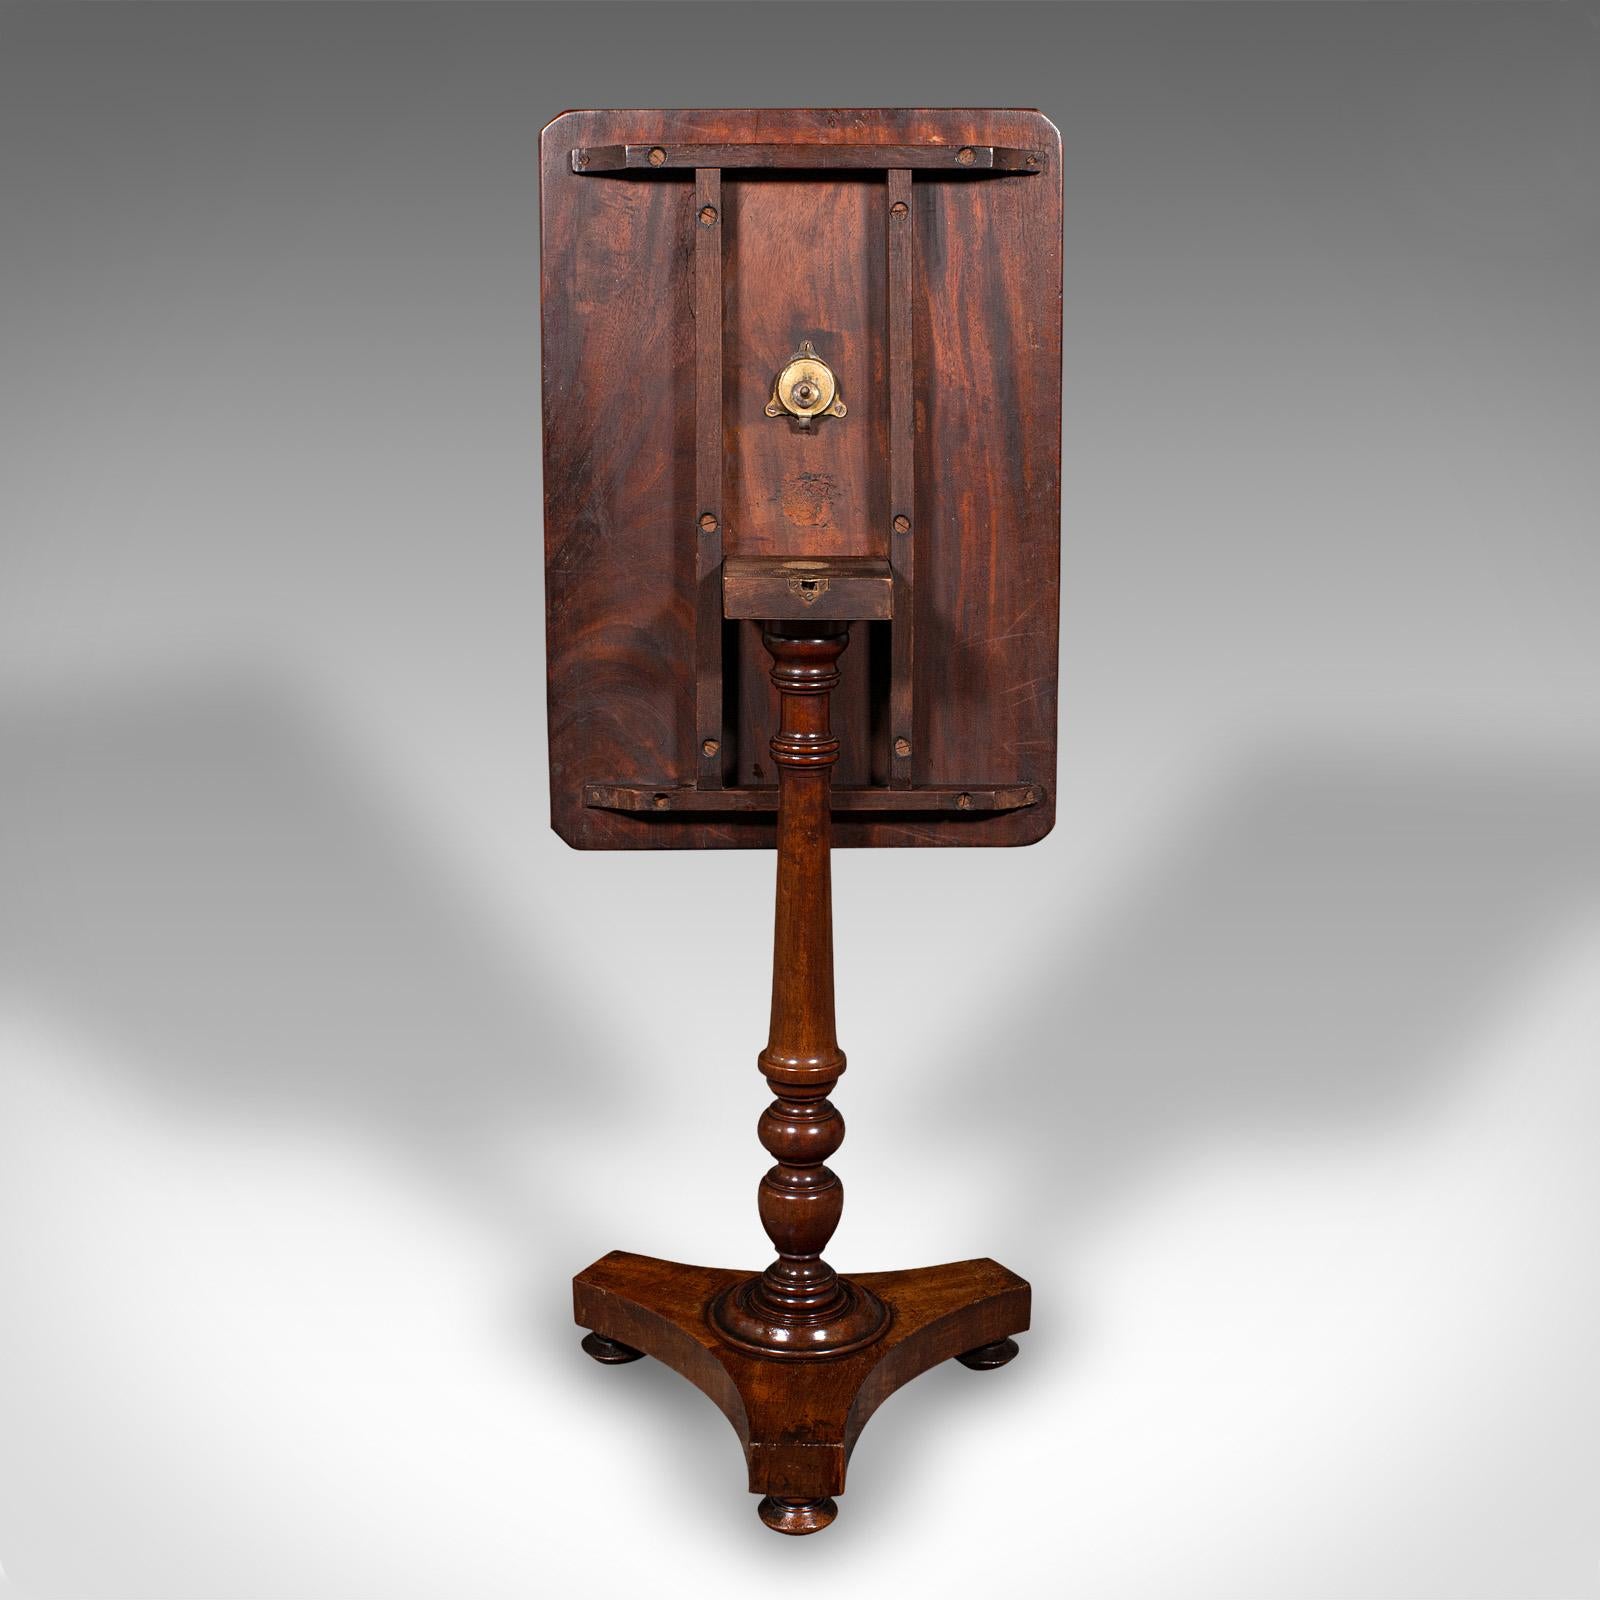 Wood Antique Tilting Lamp Table, English, Flame, Occasional, Side, Regency circa 1820 For Sale